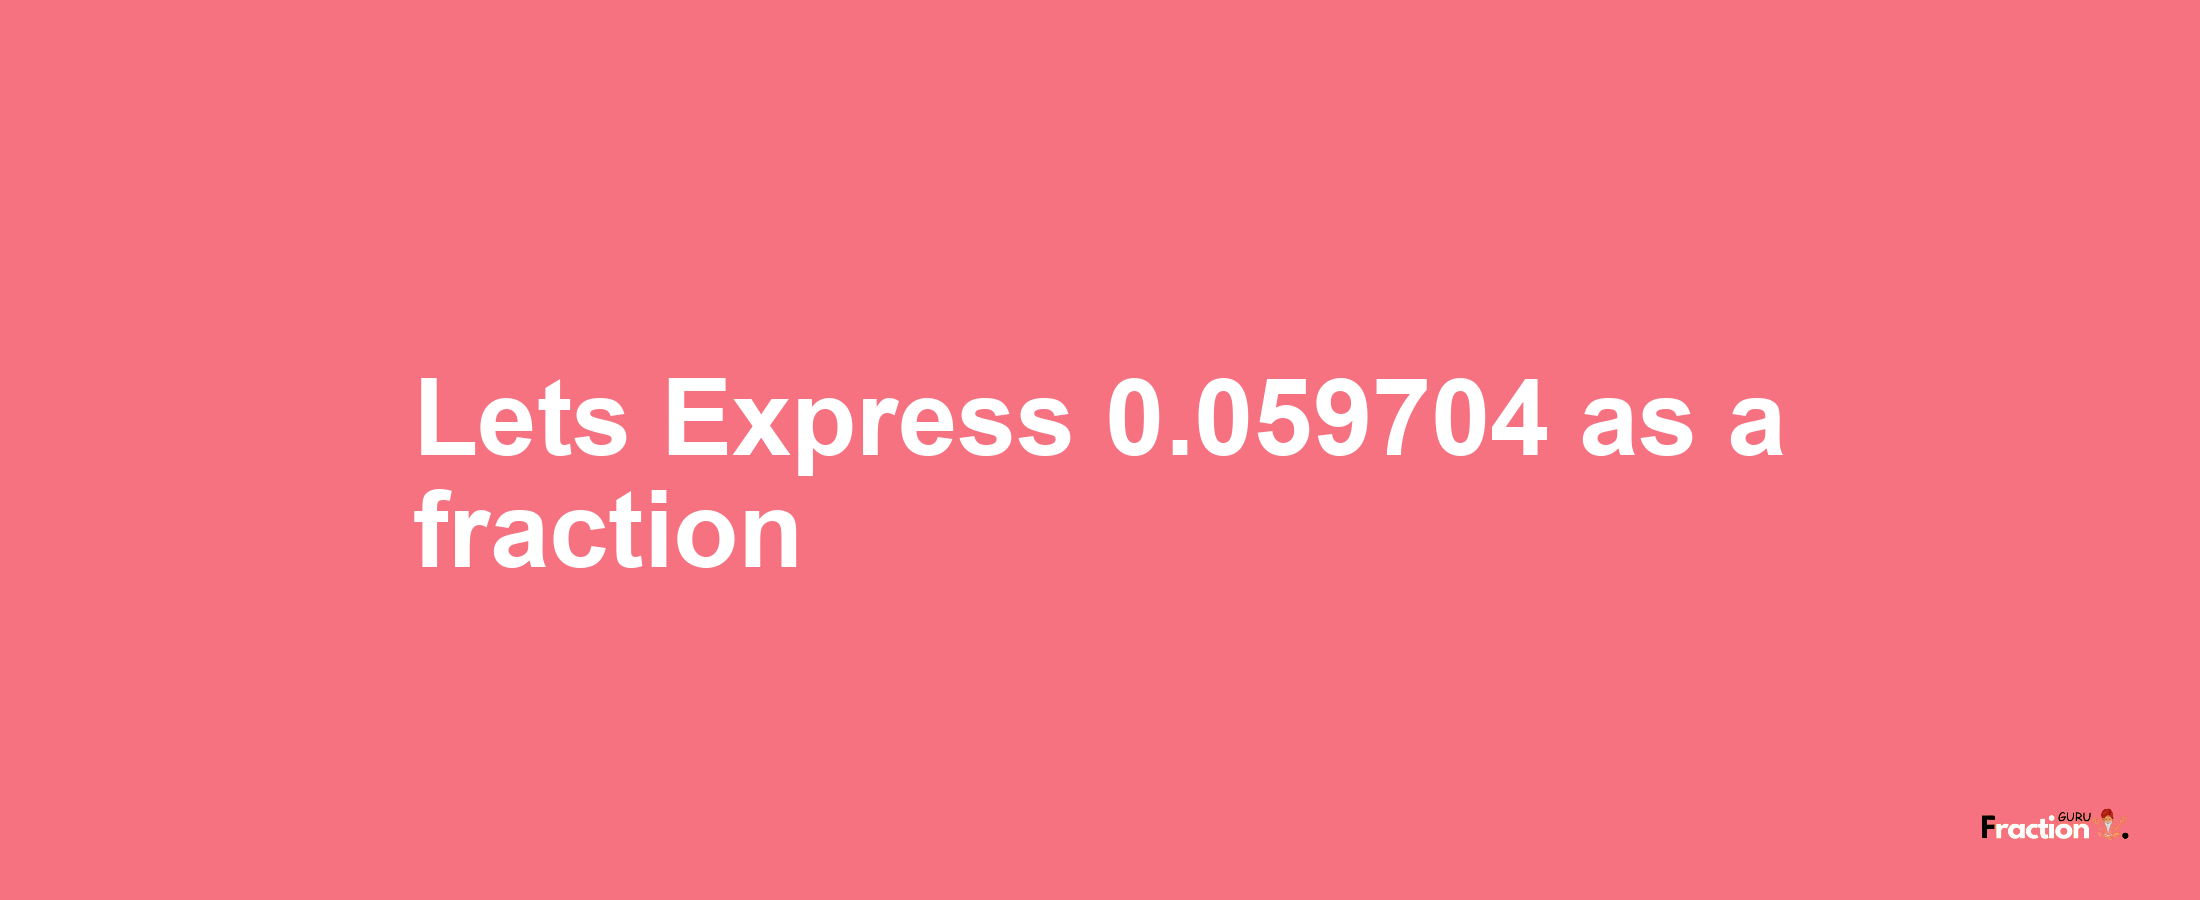 Lets Express 0.059704 as afraction